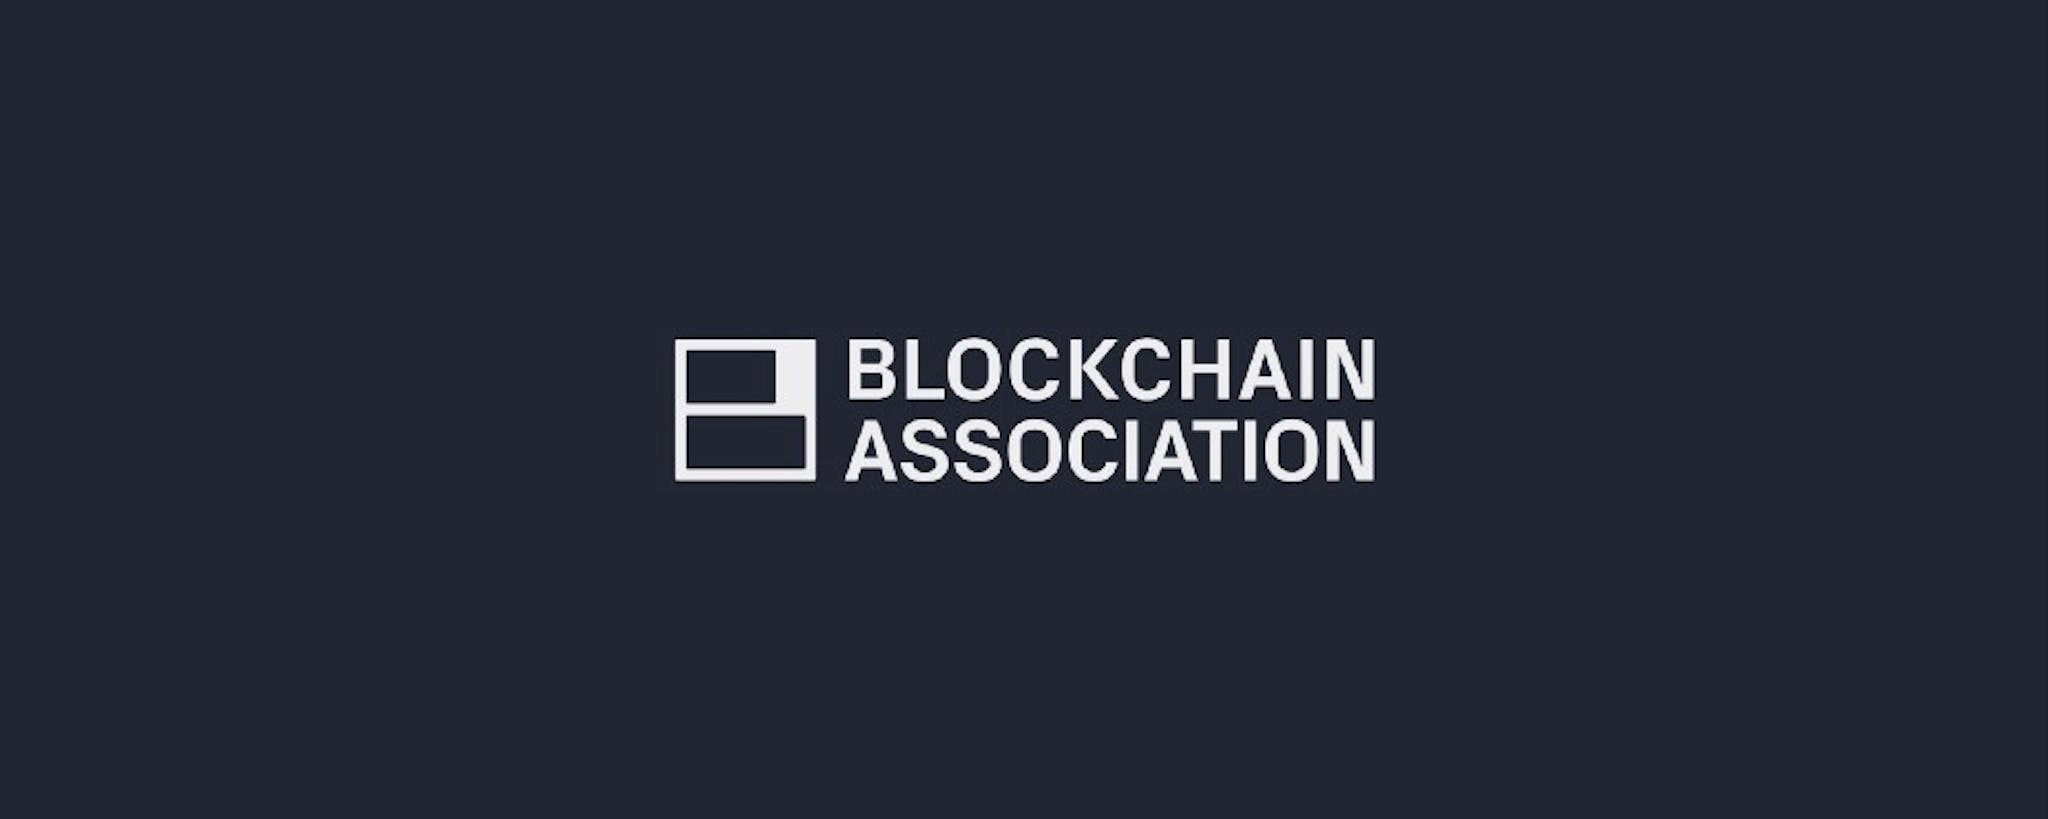 featured image - Decent is proud to be a founding member of the Blockchain Association. Here’s why.